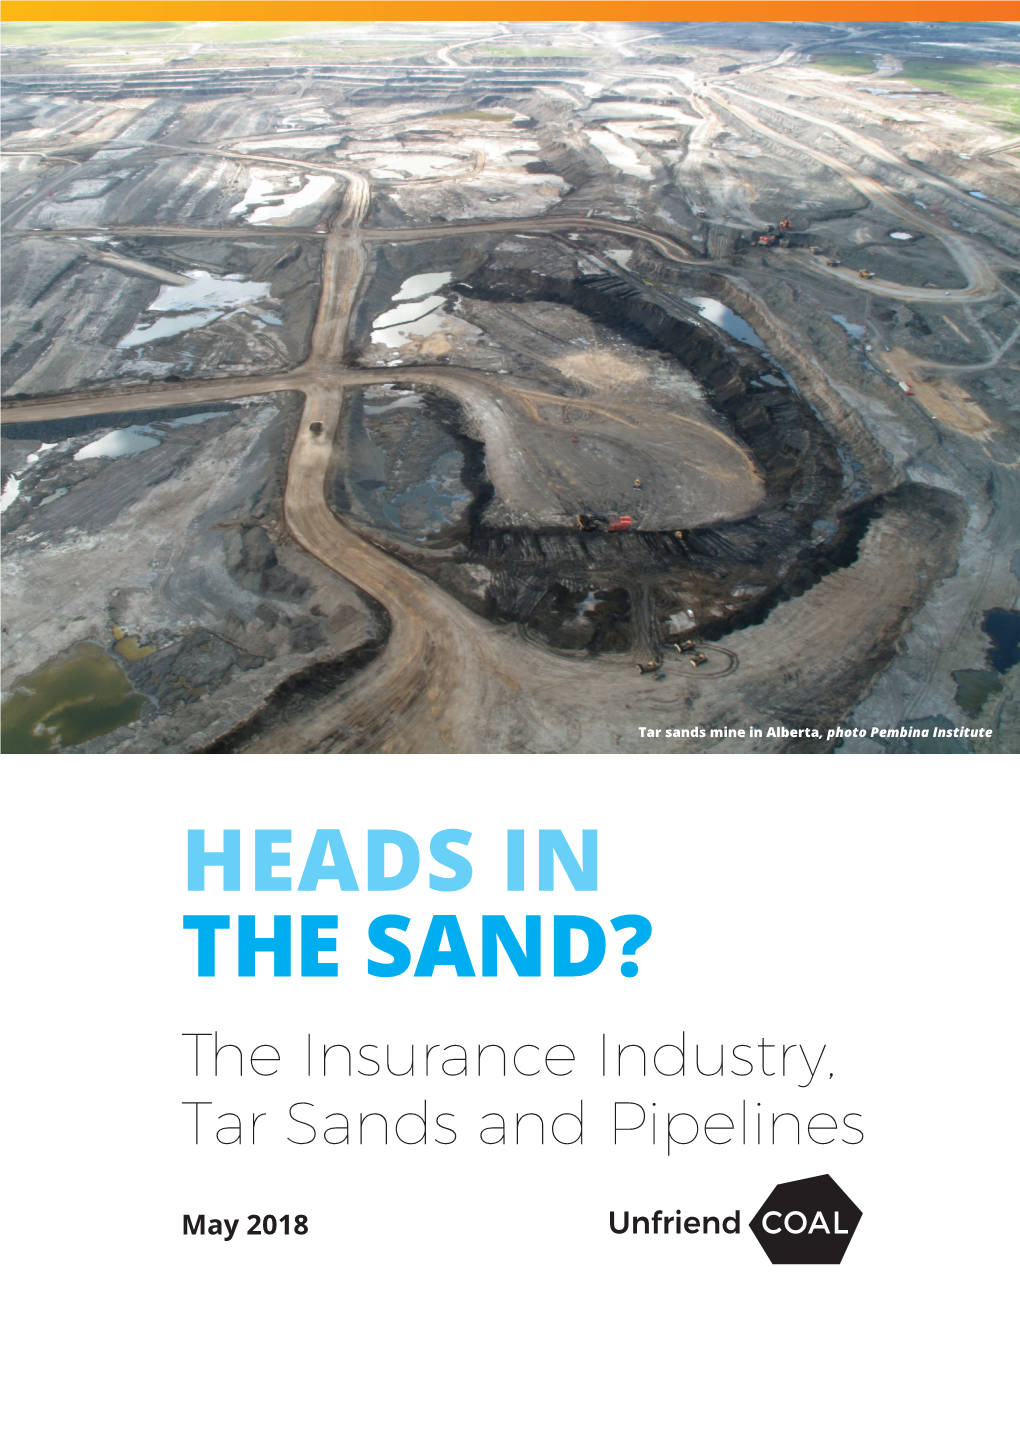 HEADS in the SAND? the Insurance Industry, Tar Sands and Pipelines